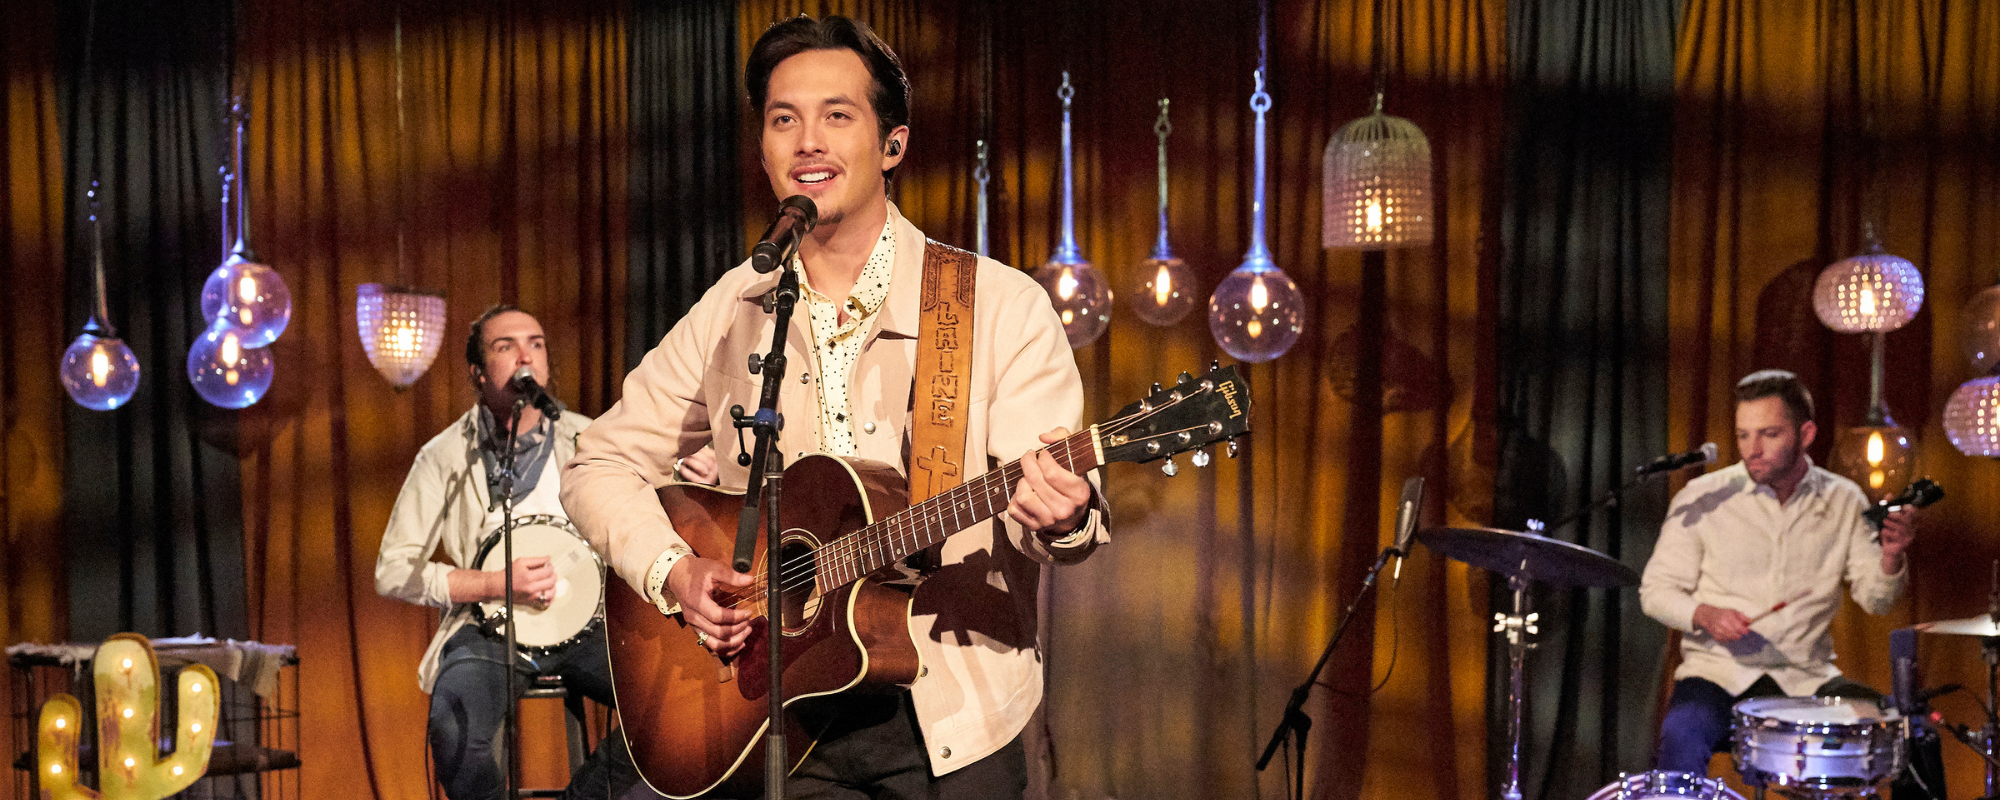 Laine Hardy Performs New Single “Memorize You” on ‘The Bachelorette’